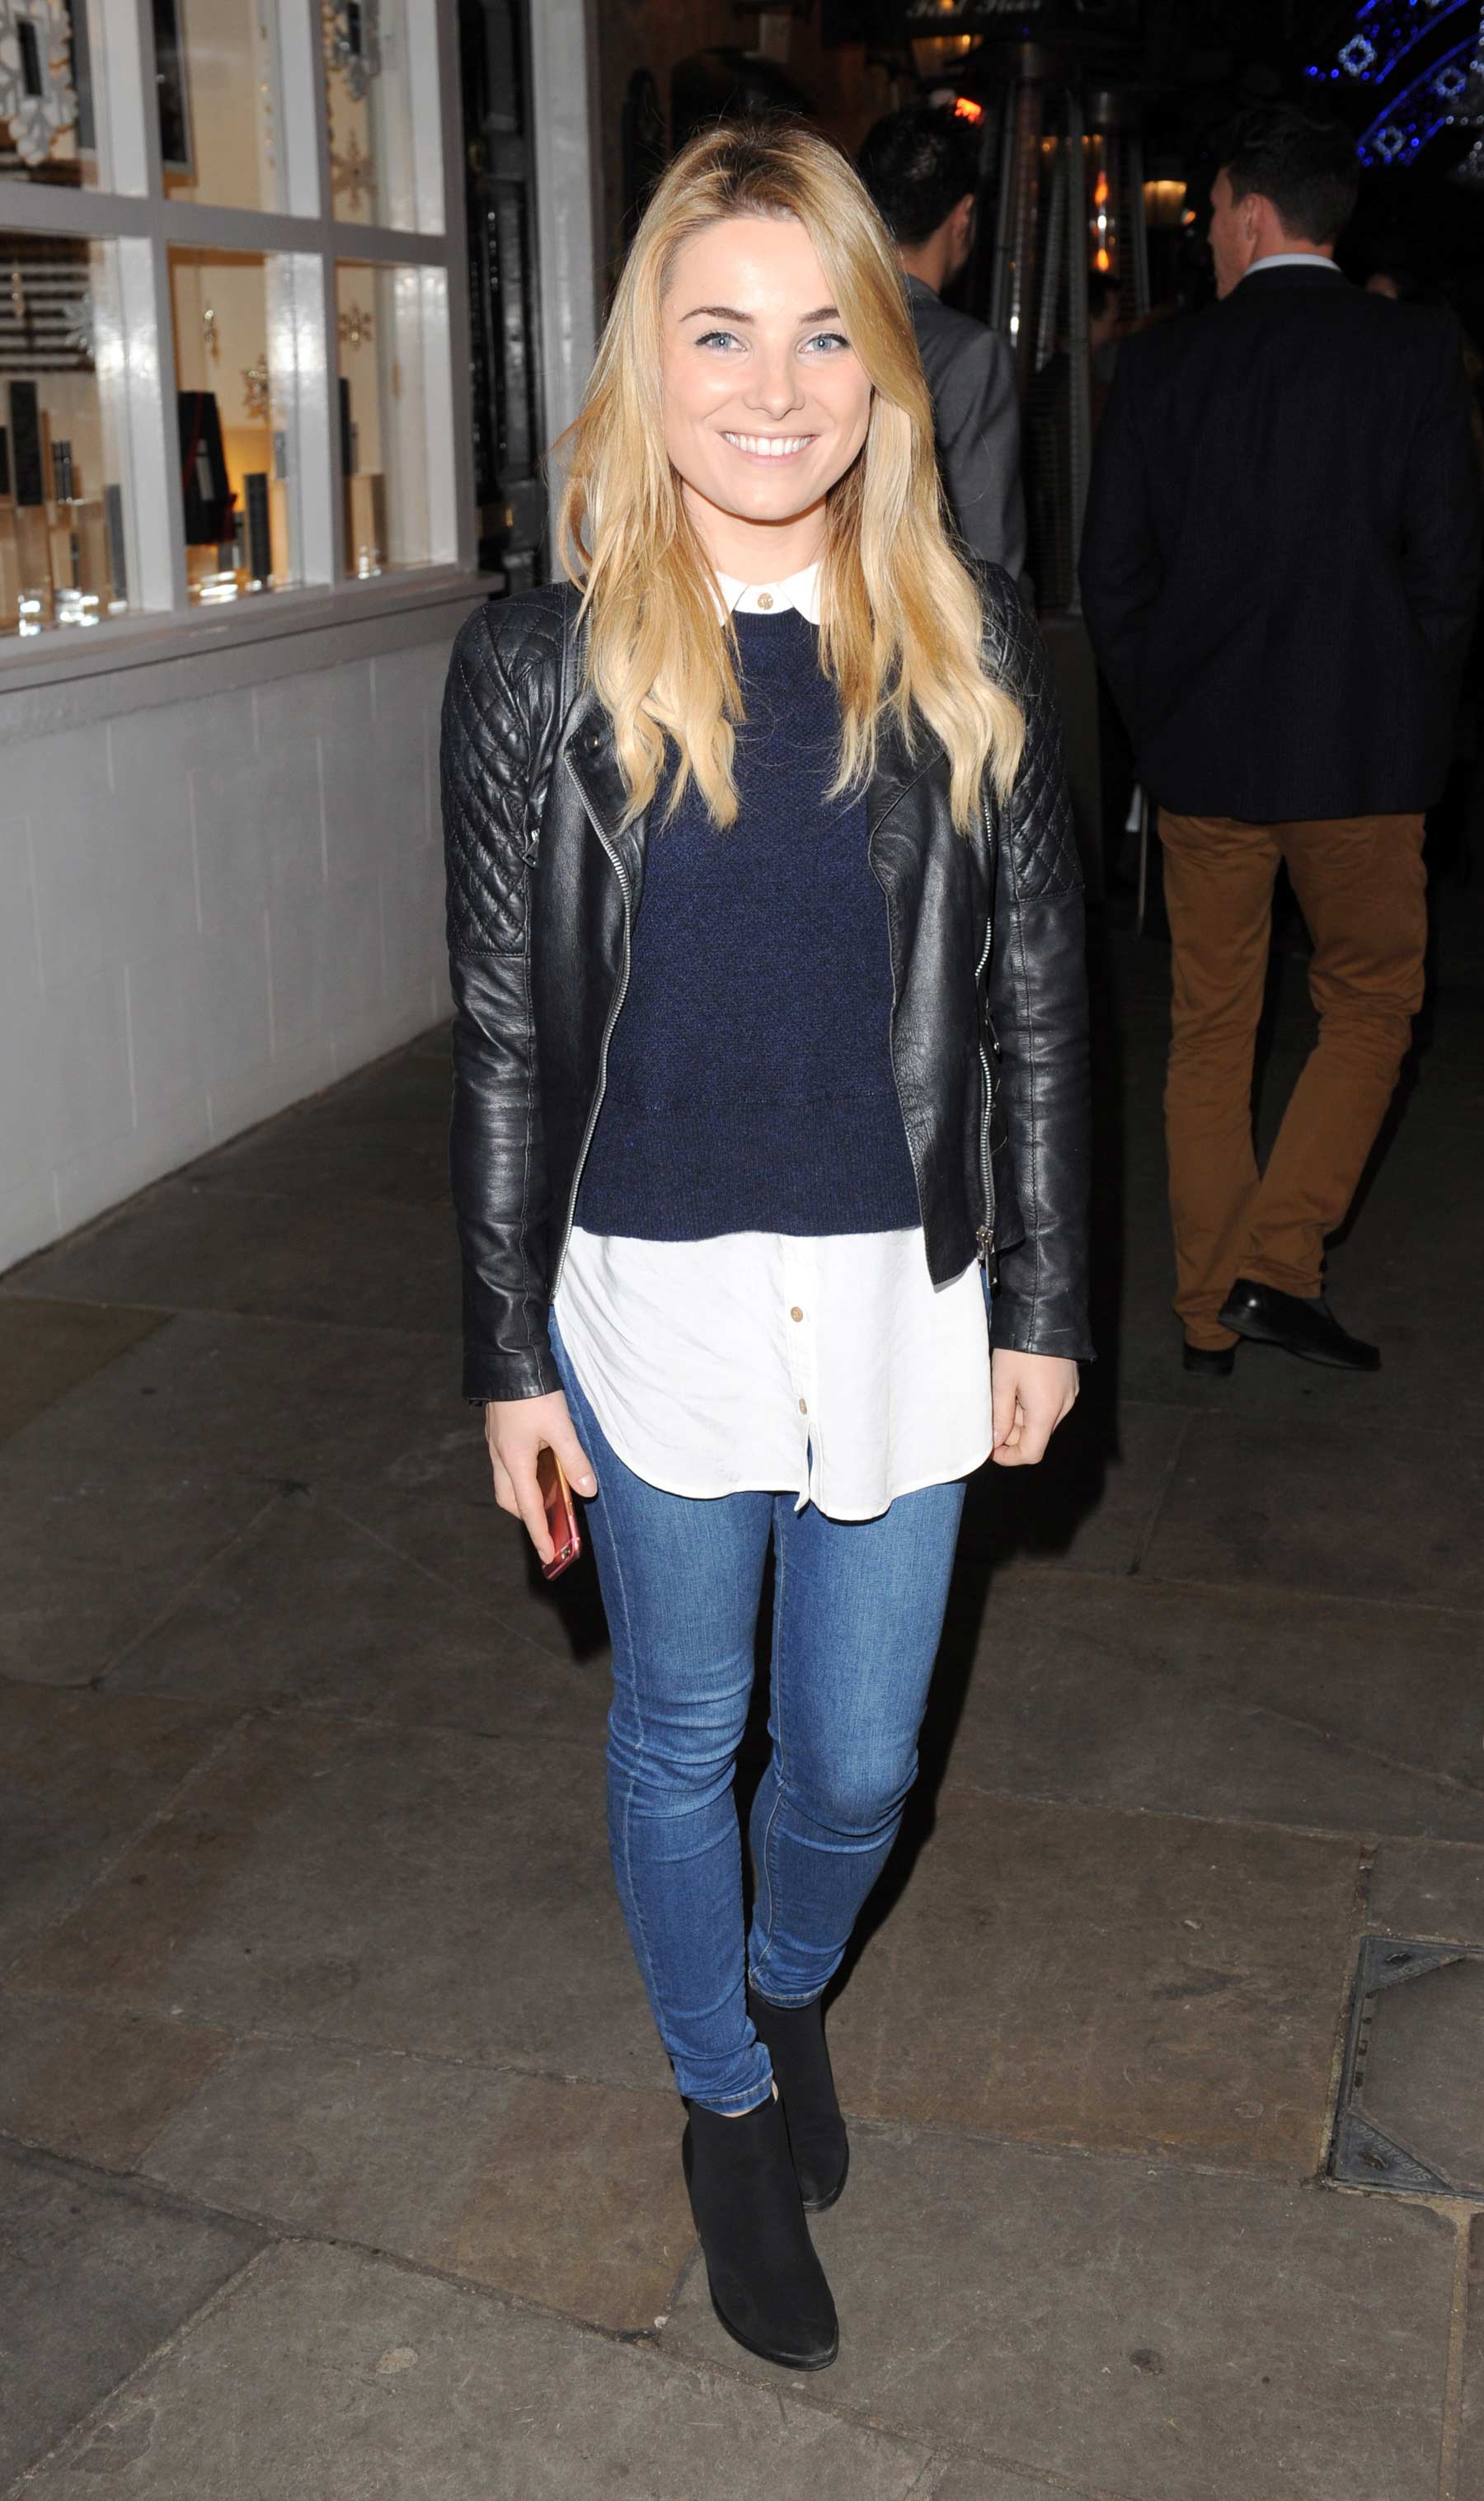 Sian Welby attended the Metro’s Guilty Pleasures Christmas Party